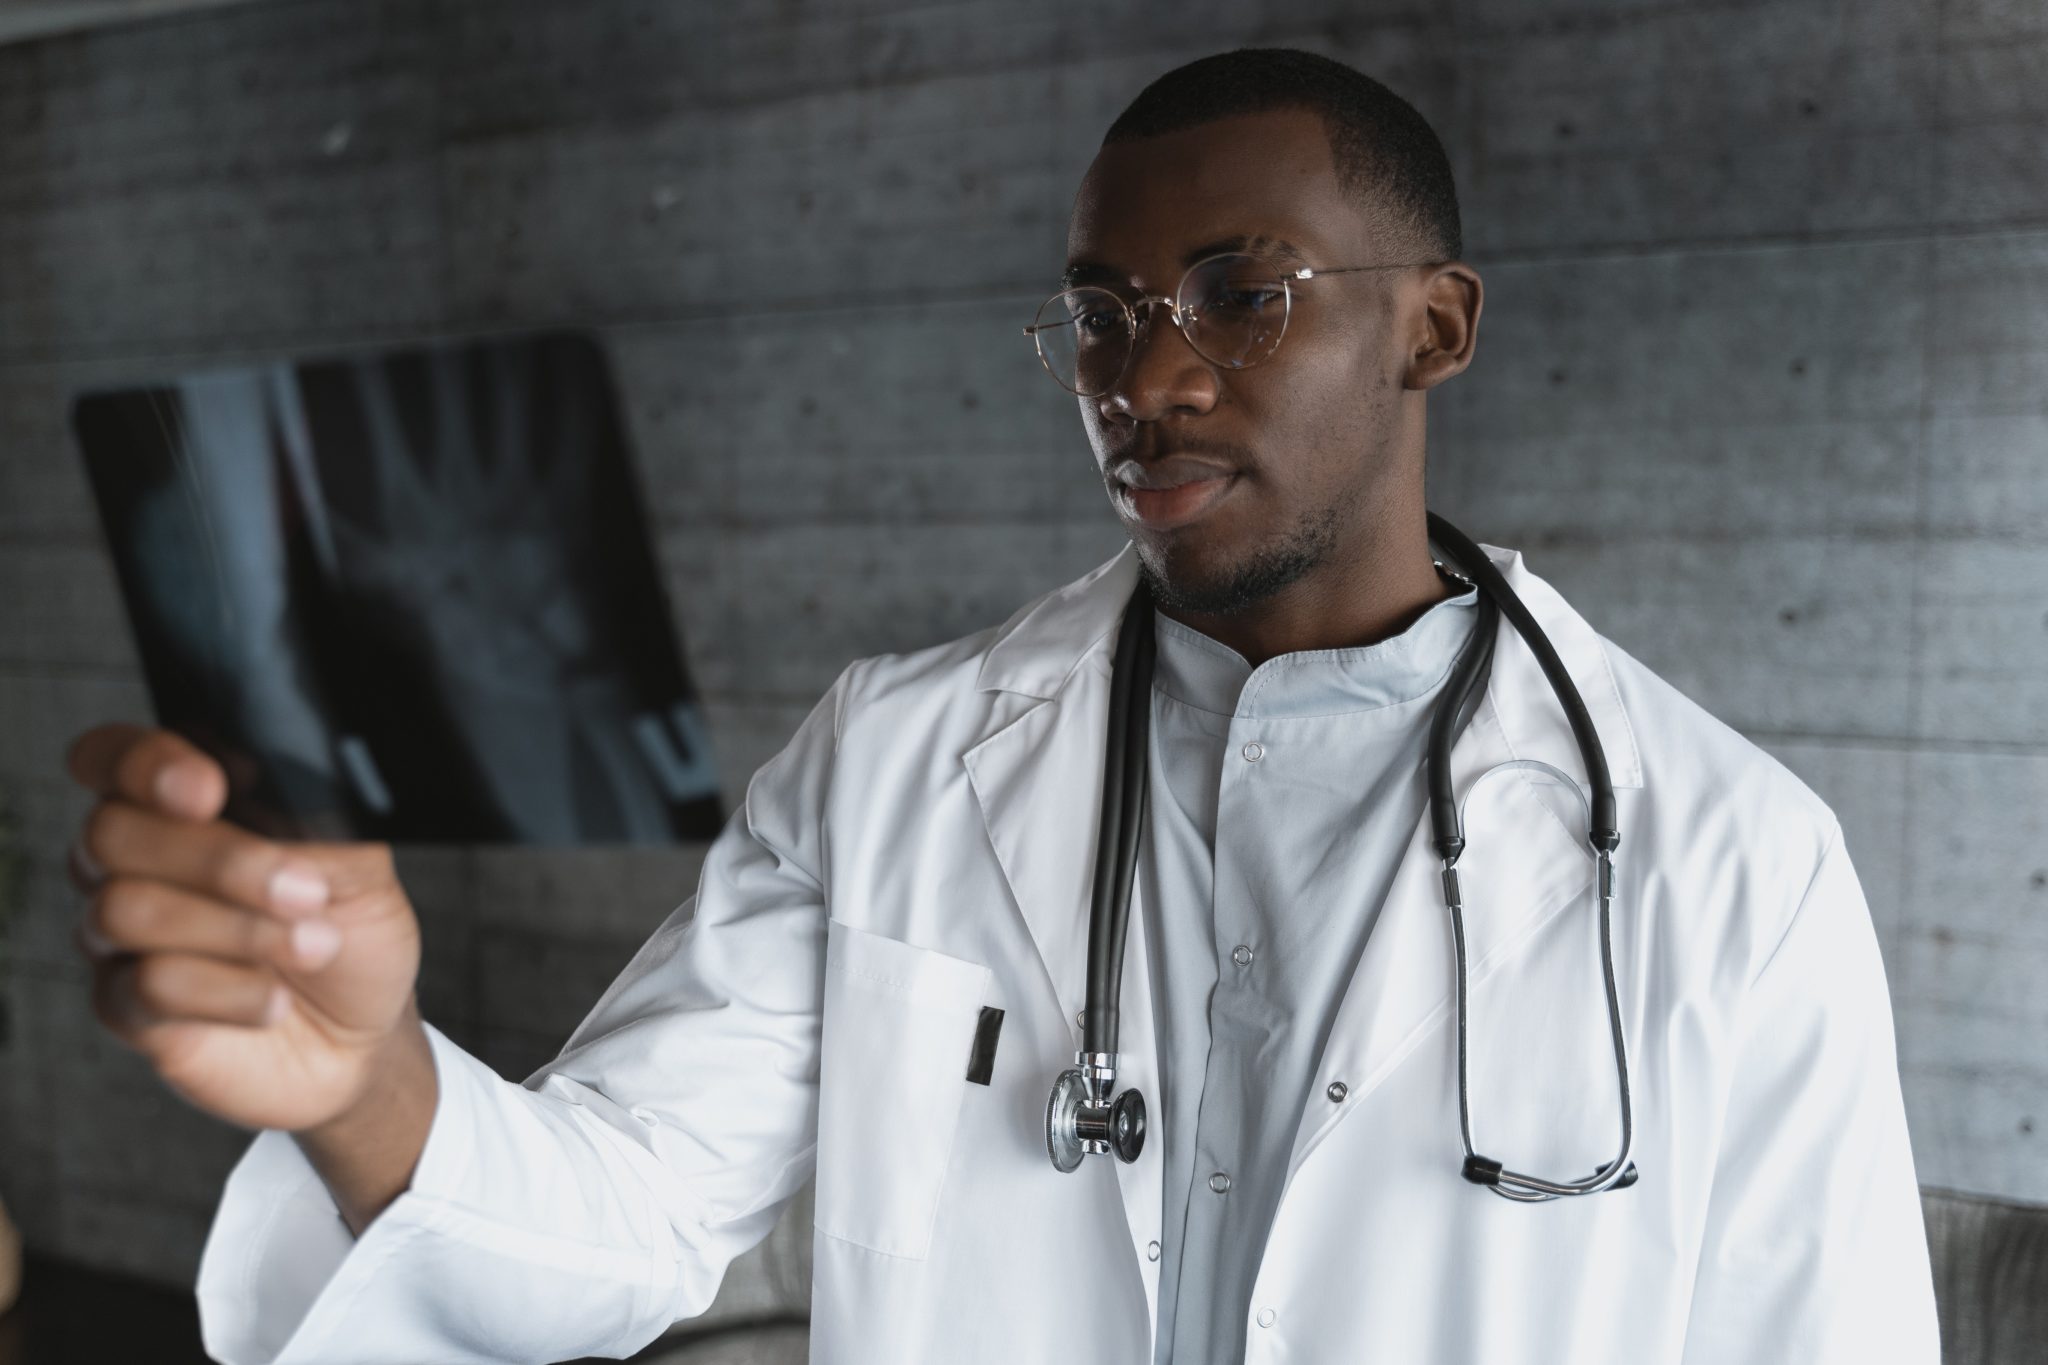 A black doctor wearing a white coat and glasses looks at an xray